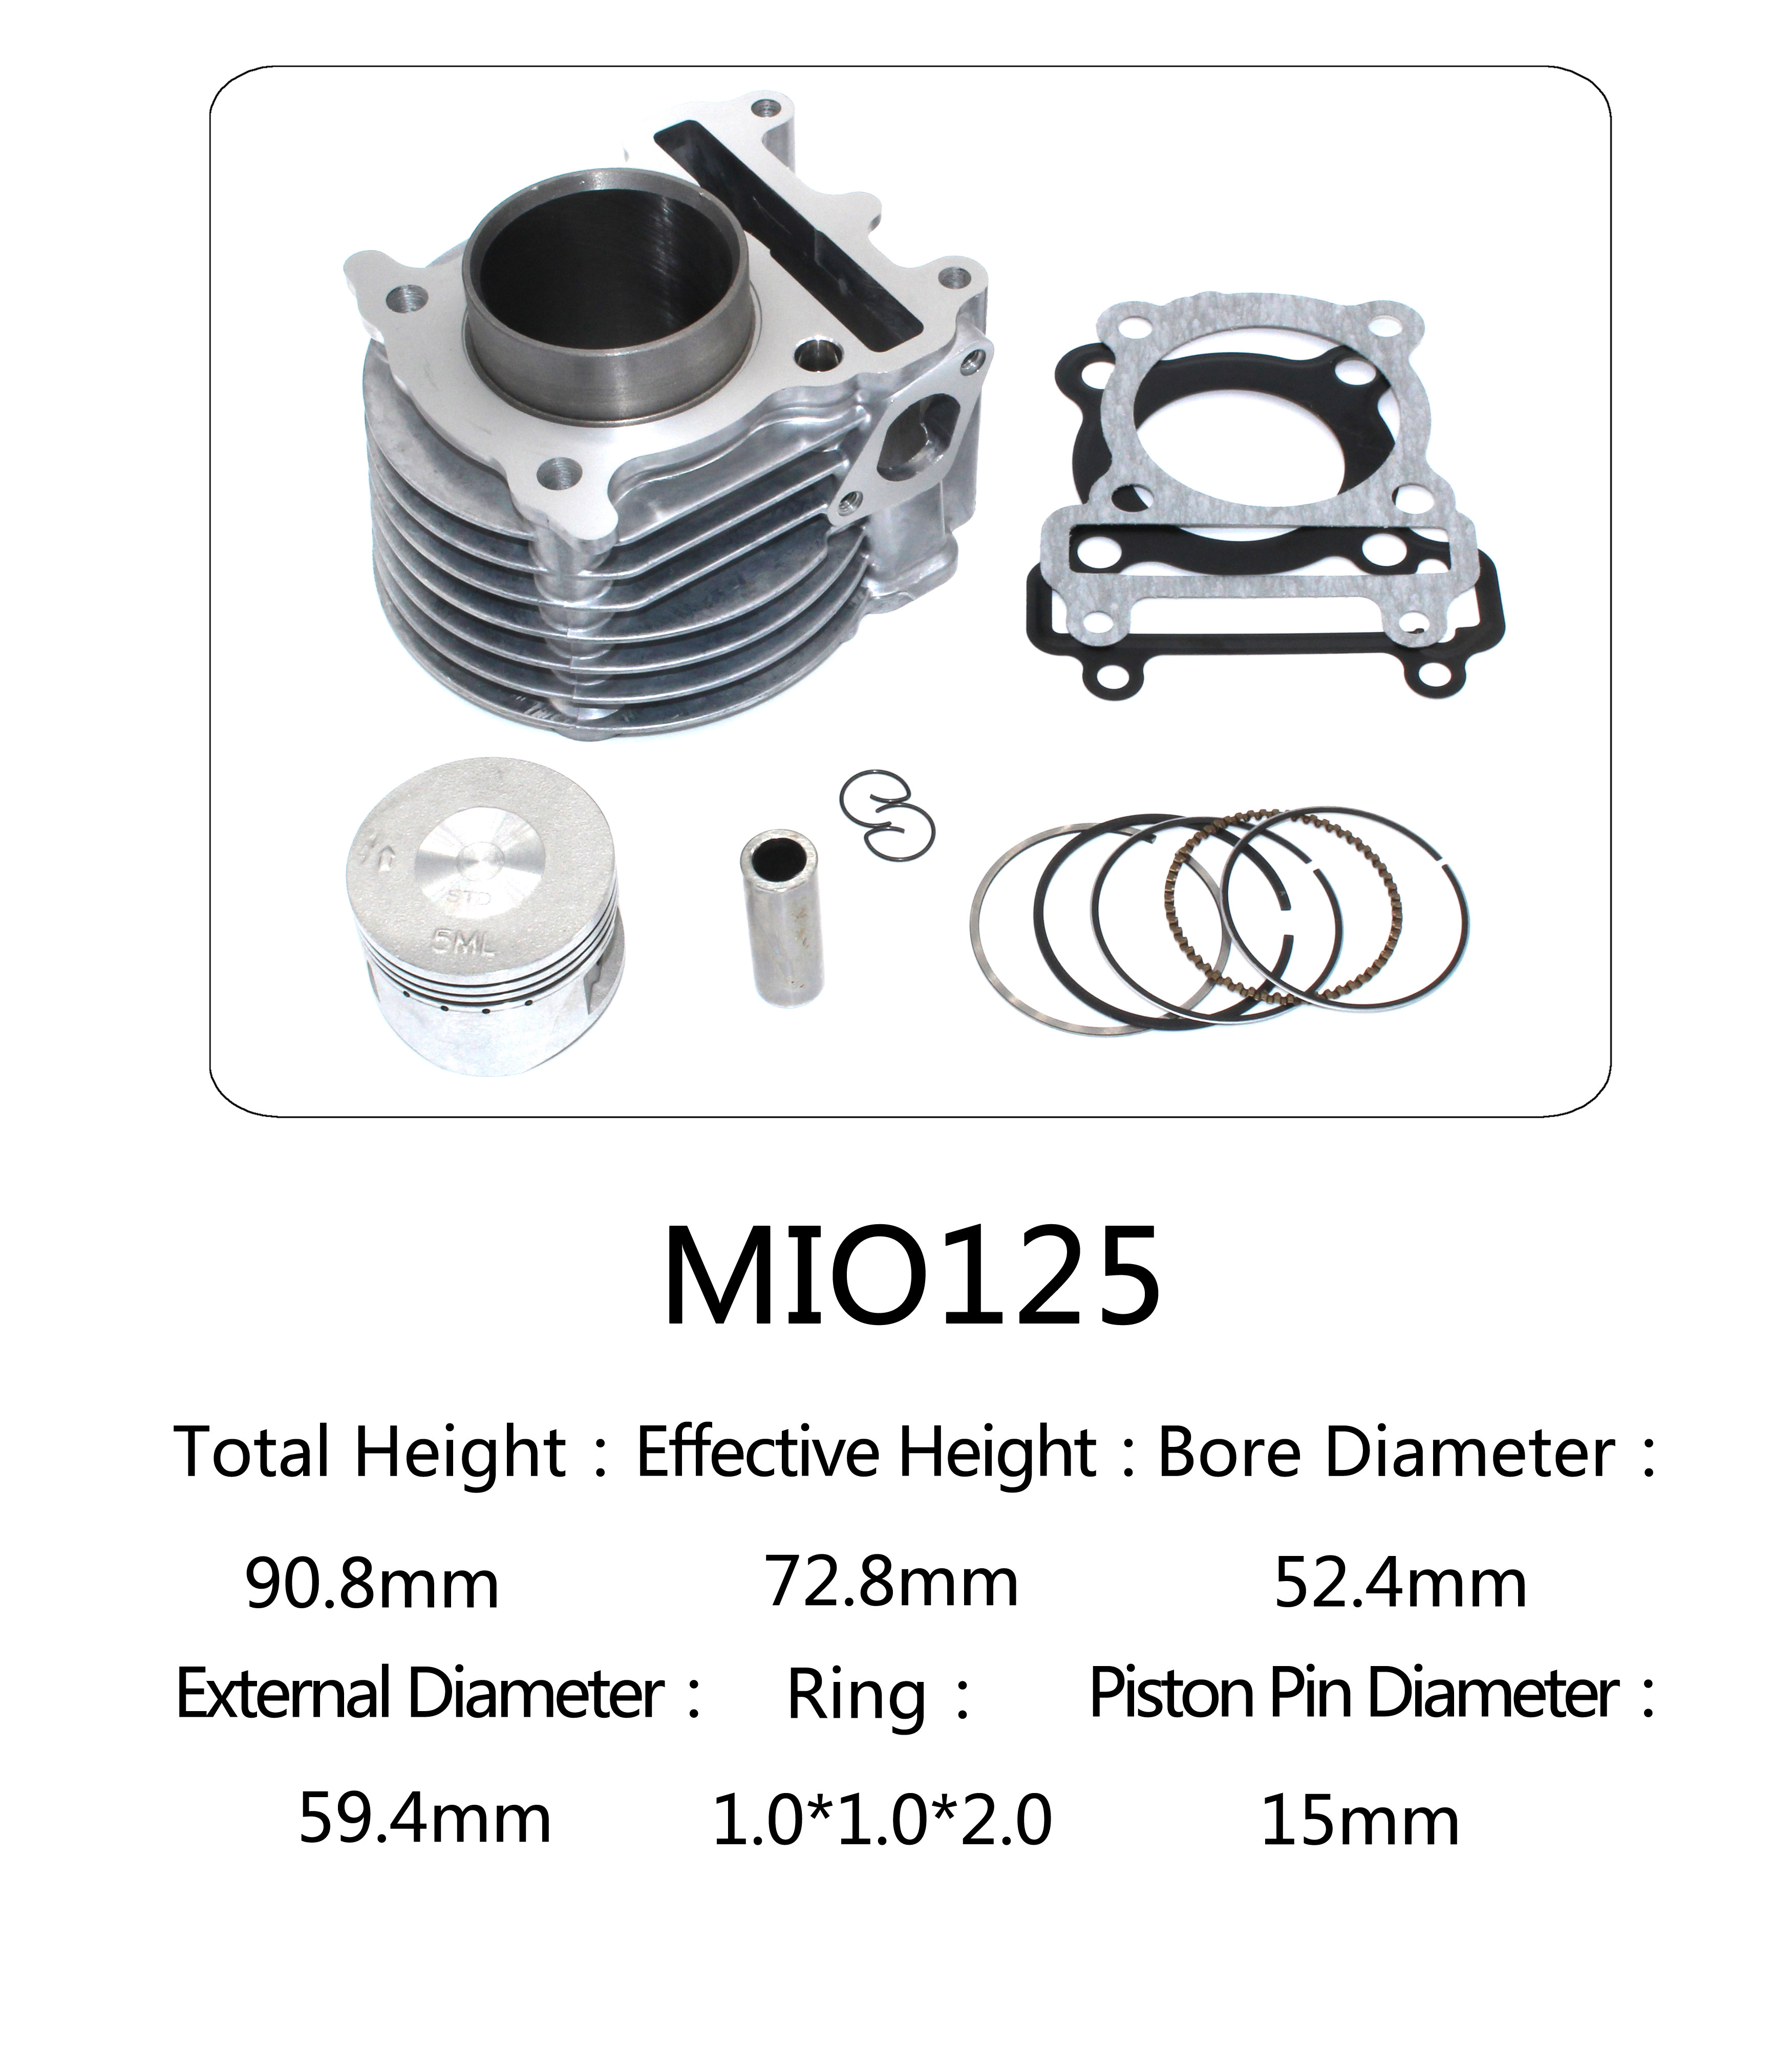 High Performance Air Cooled Motorcycle Cylinder Kit For Yamaha 125 Scooter